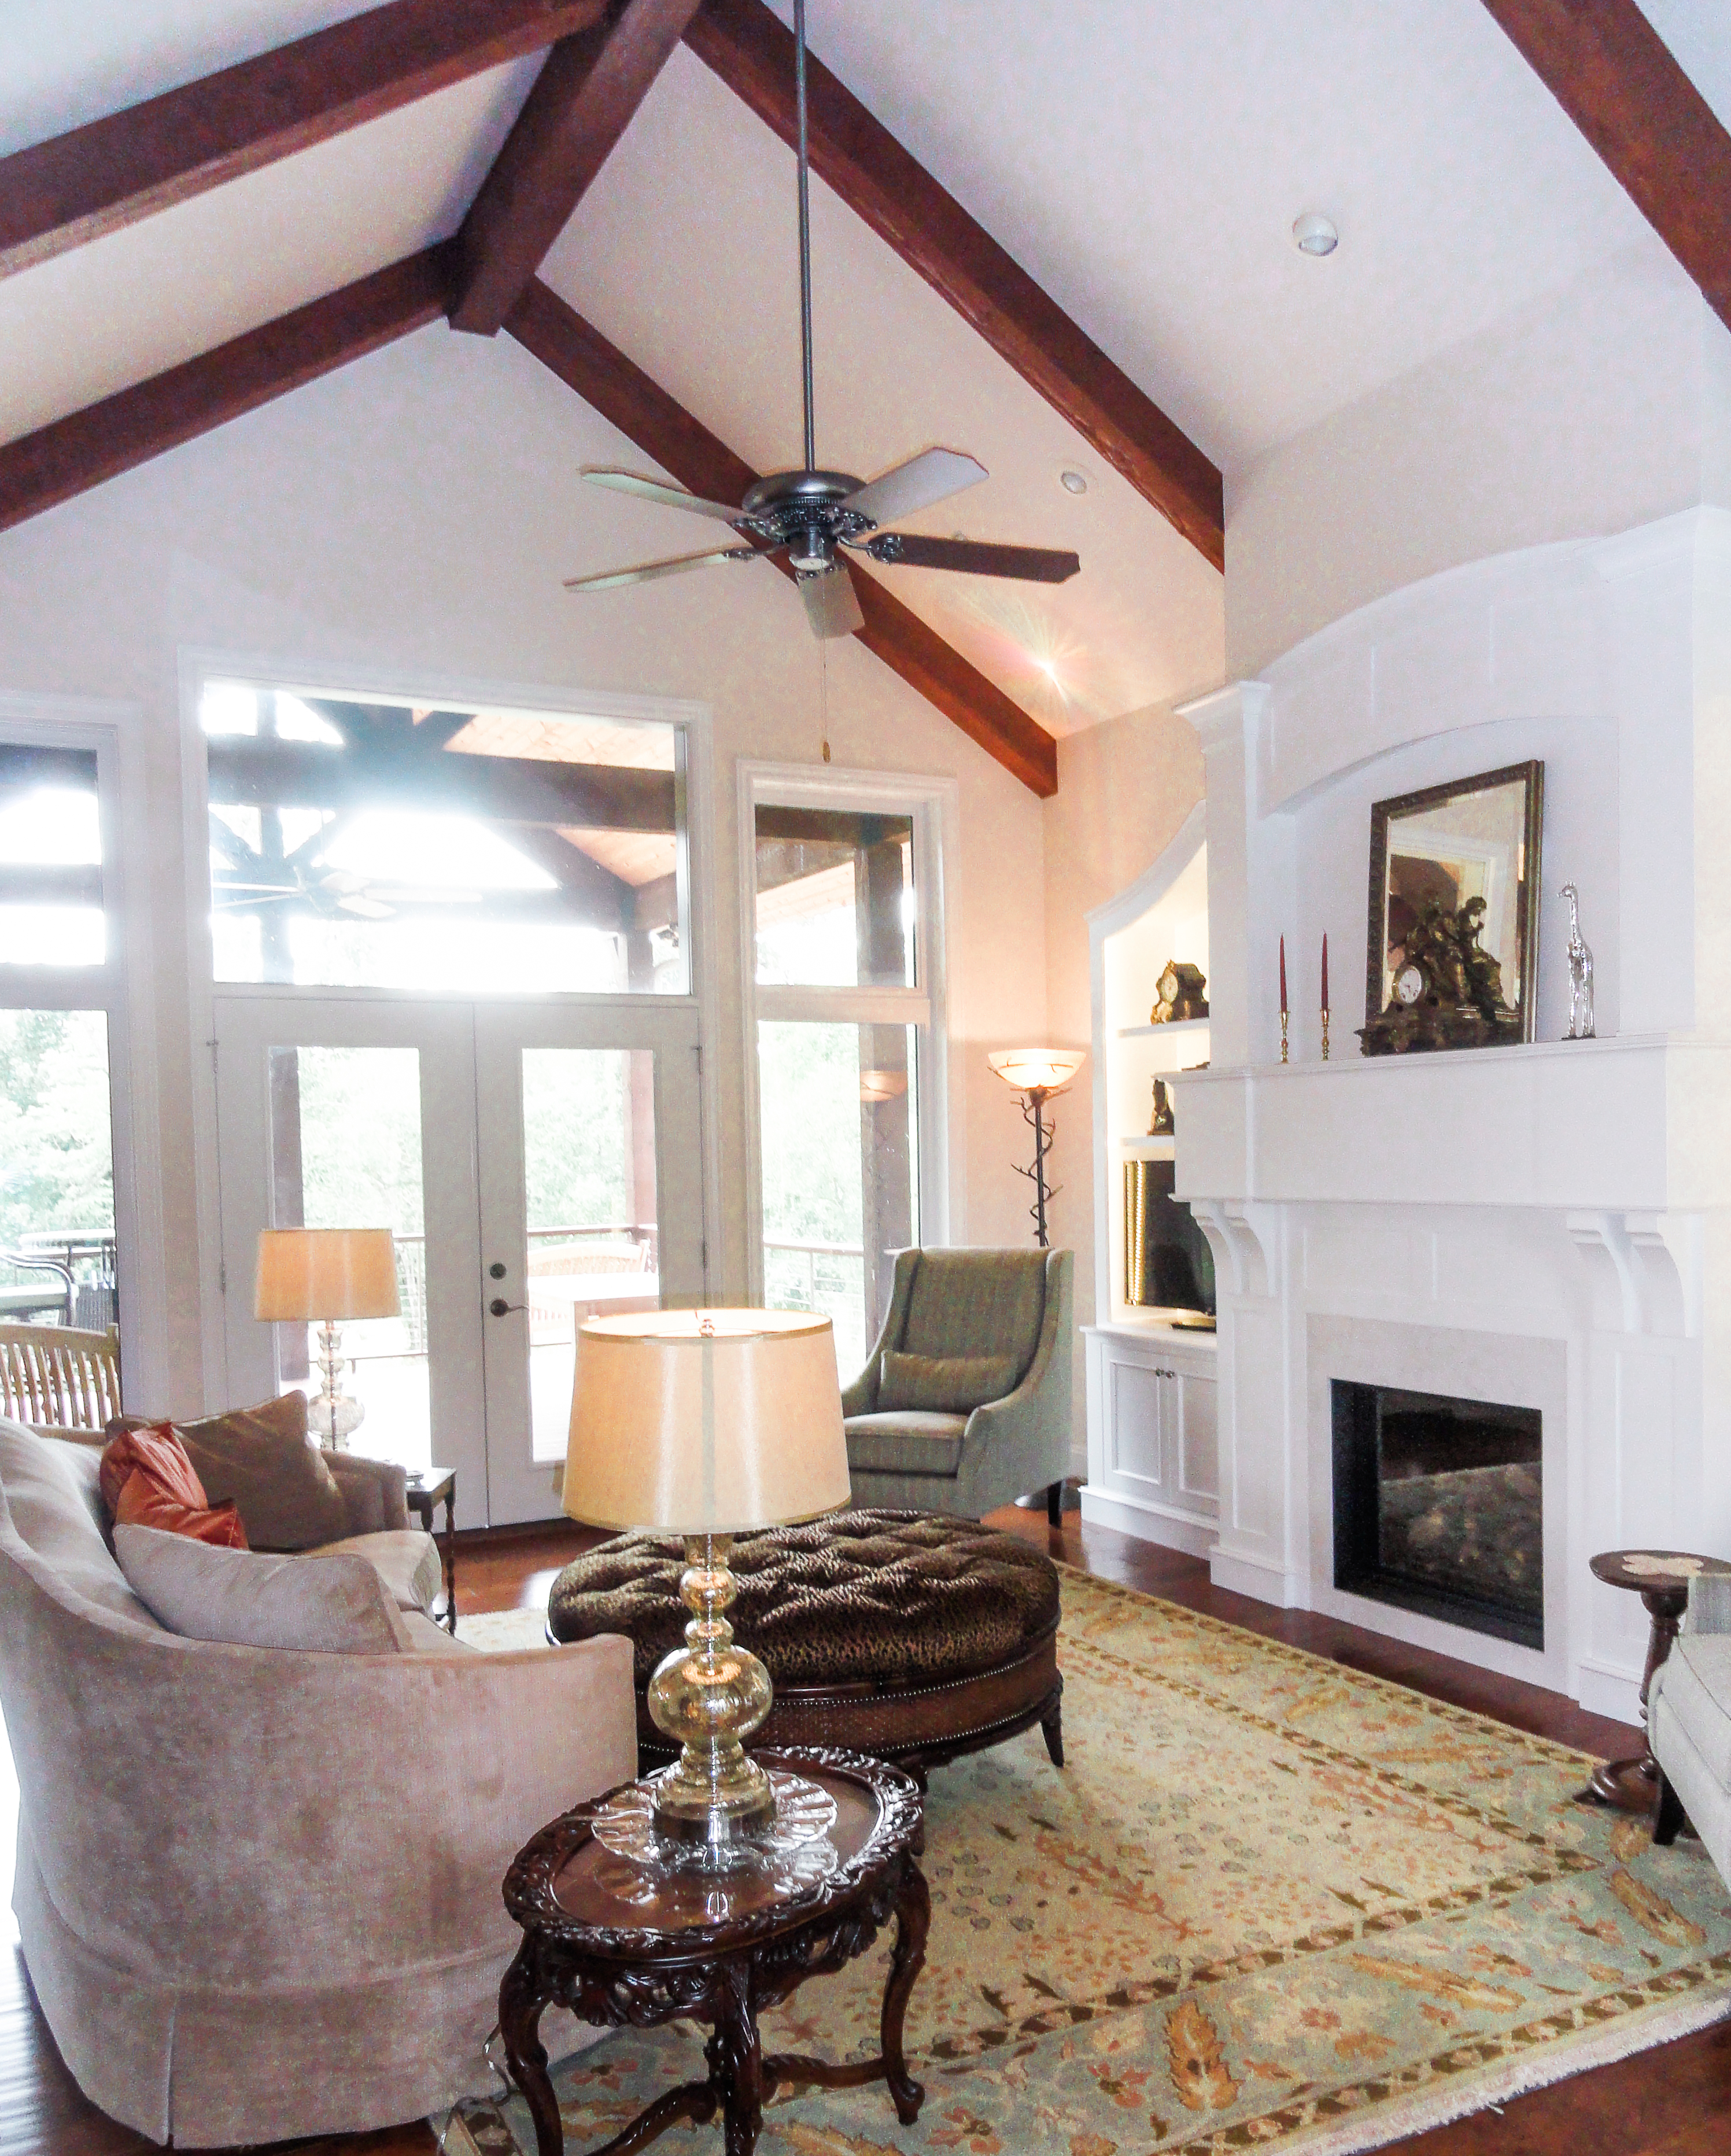 velvet couch, wood beams, white fireplace, white mantle, french doors, round tufted ottoman,